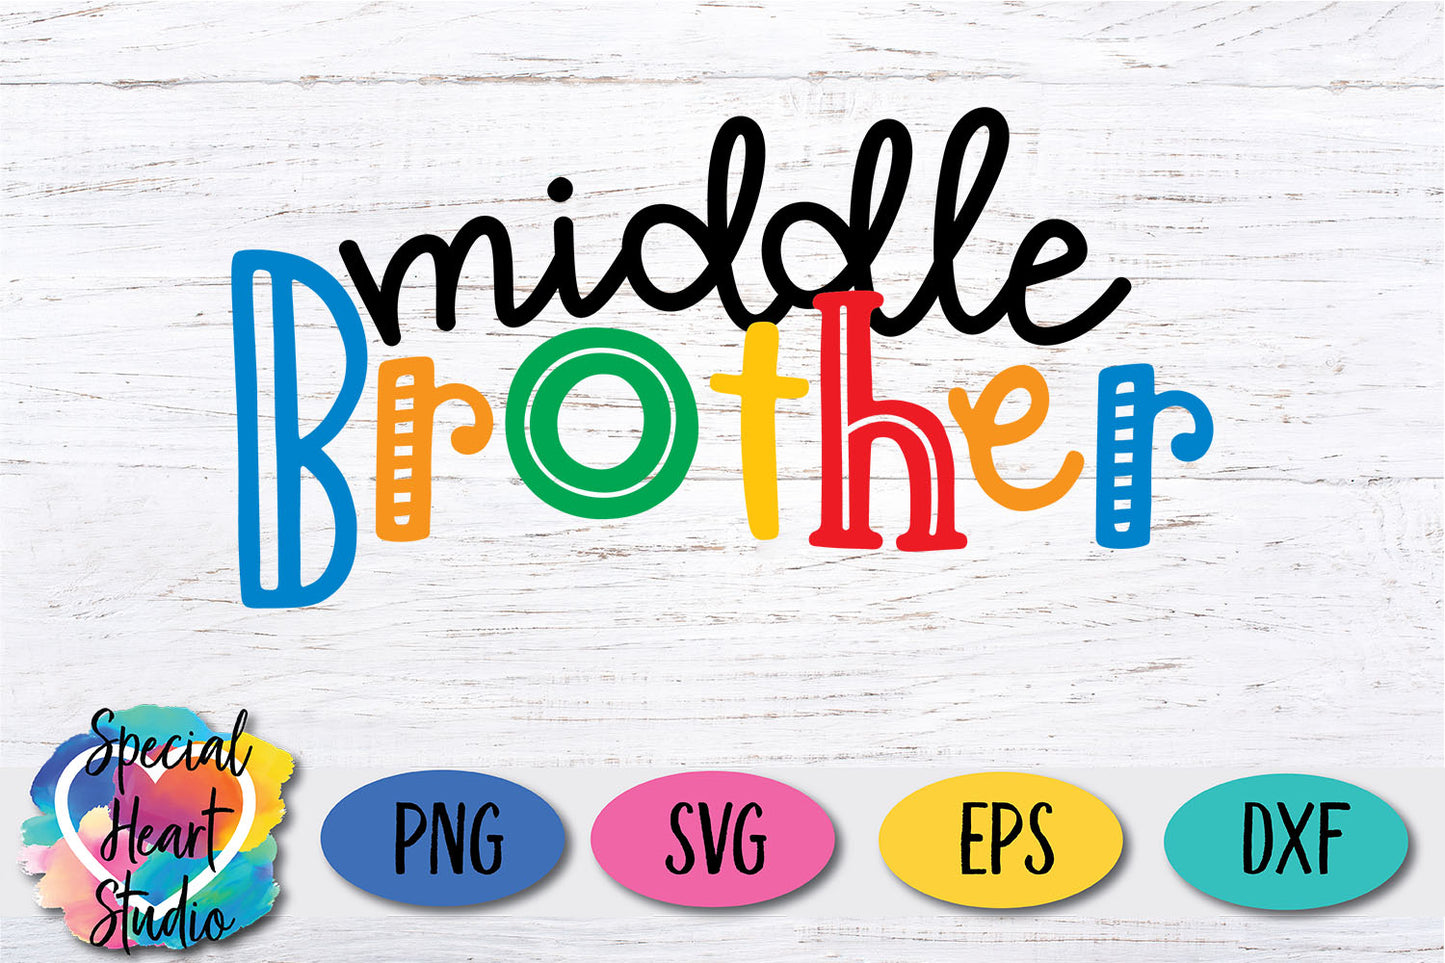 Middle Brother